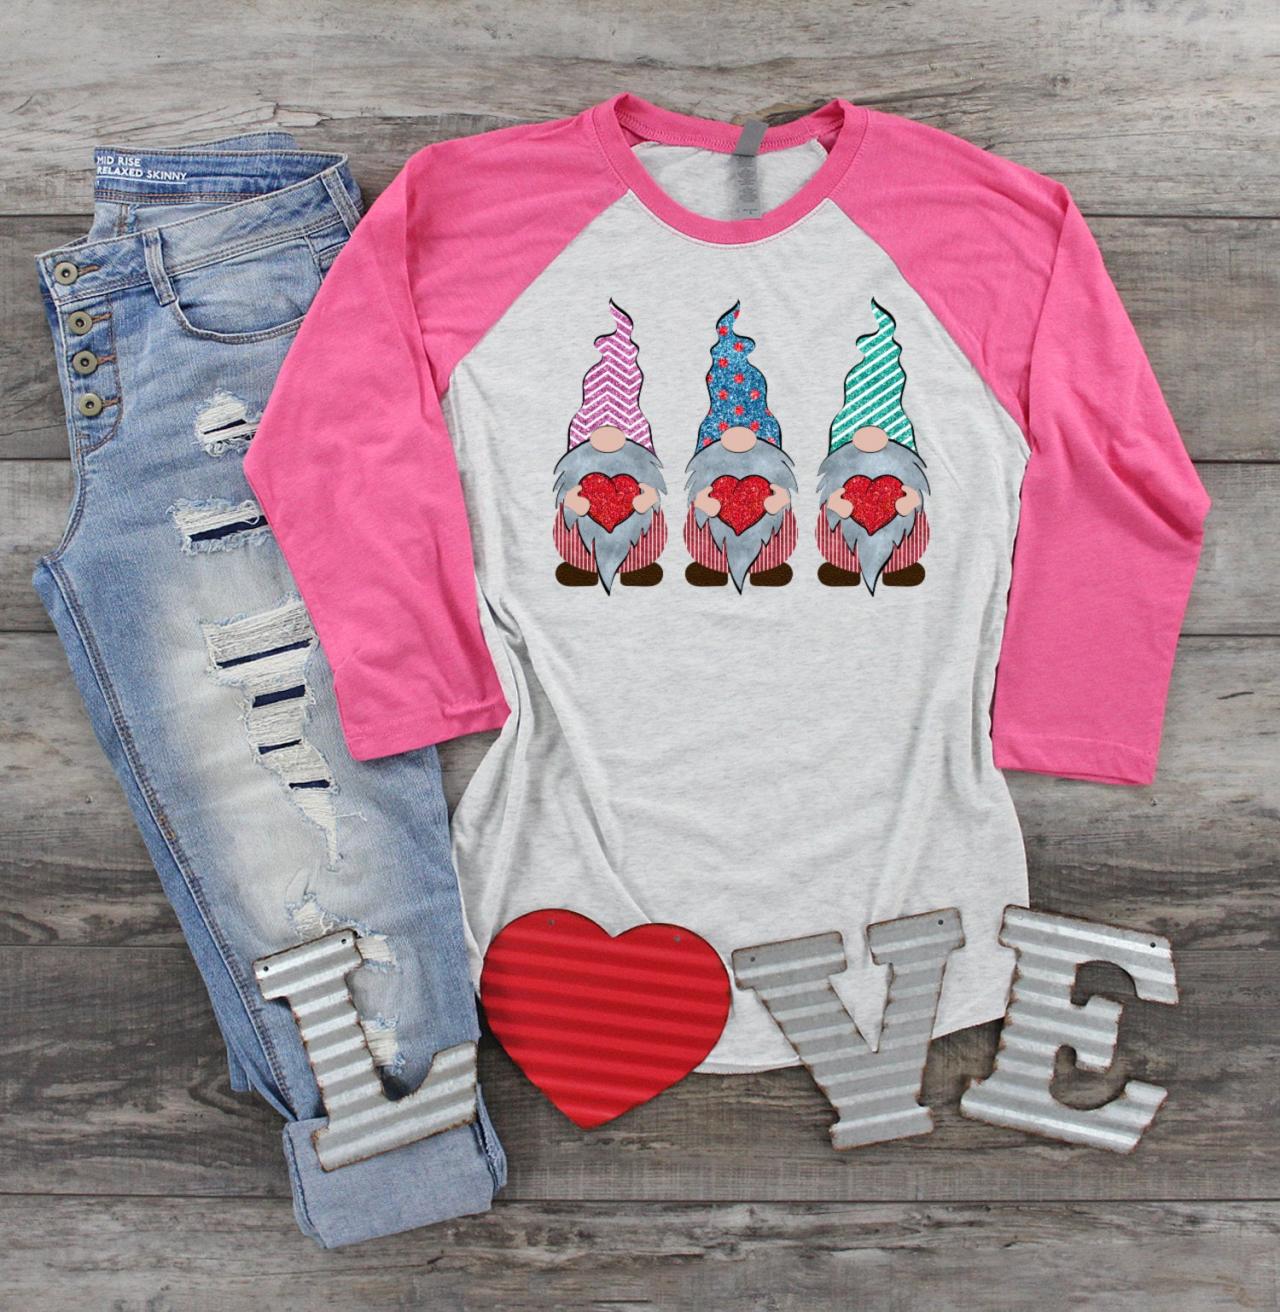 Gnomes And Hearts. Love. Valentines Day Raglan. Sublimation. Next Level. Valentines Day Tee. Love. Gnomes Valentines. Gnomes Love.striped